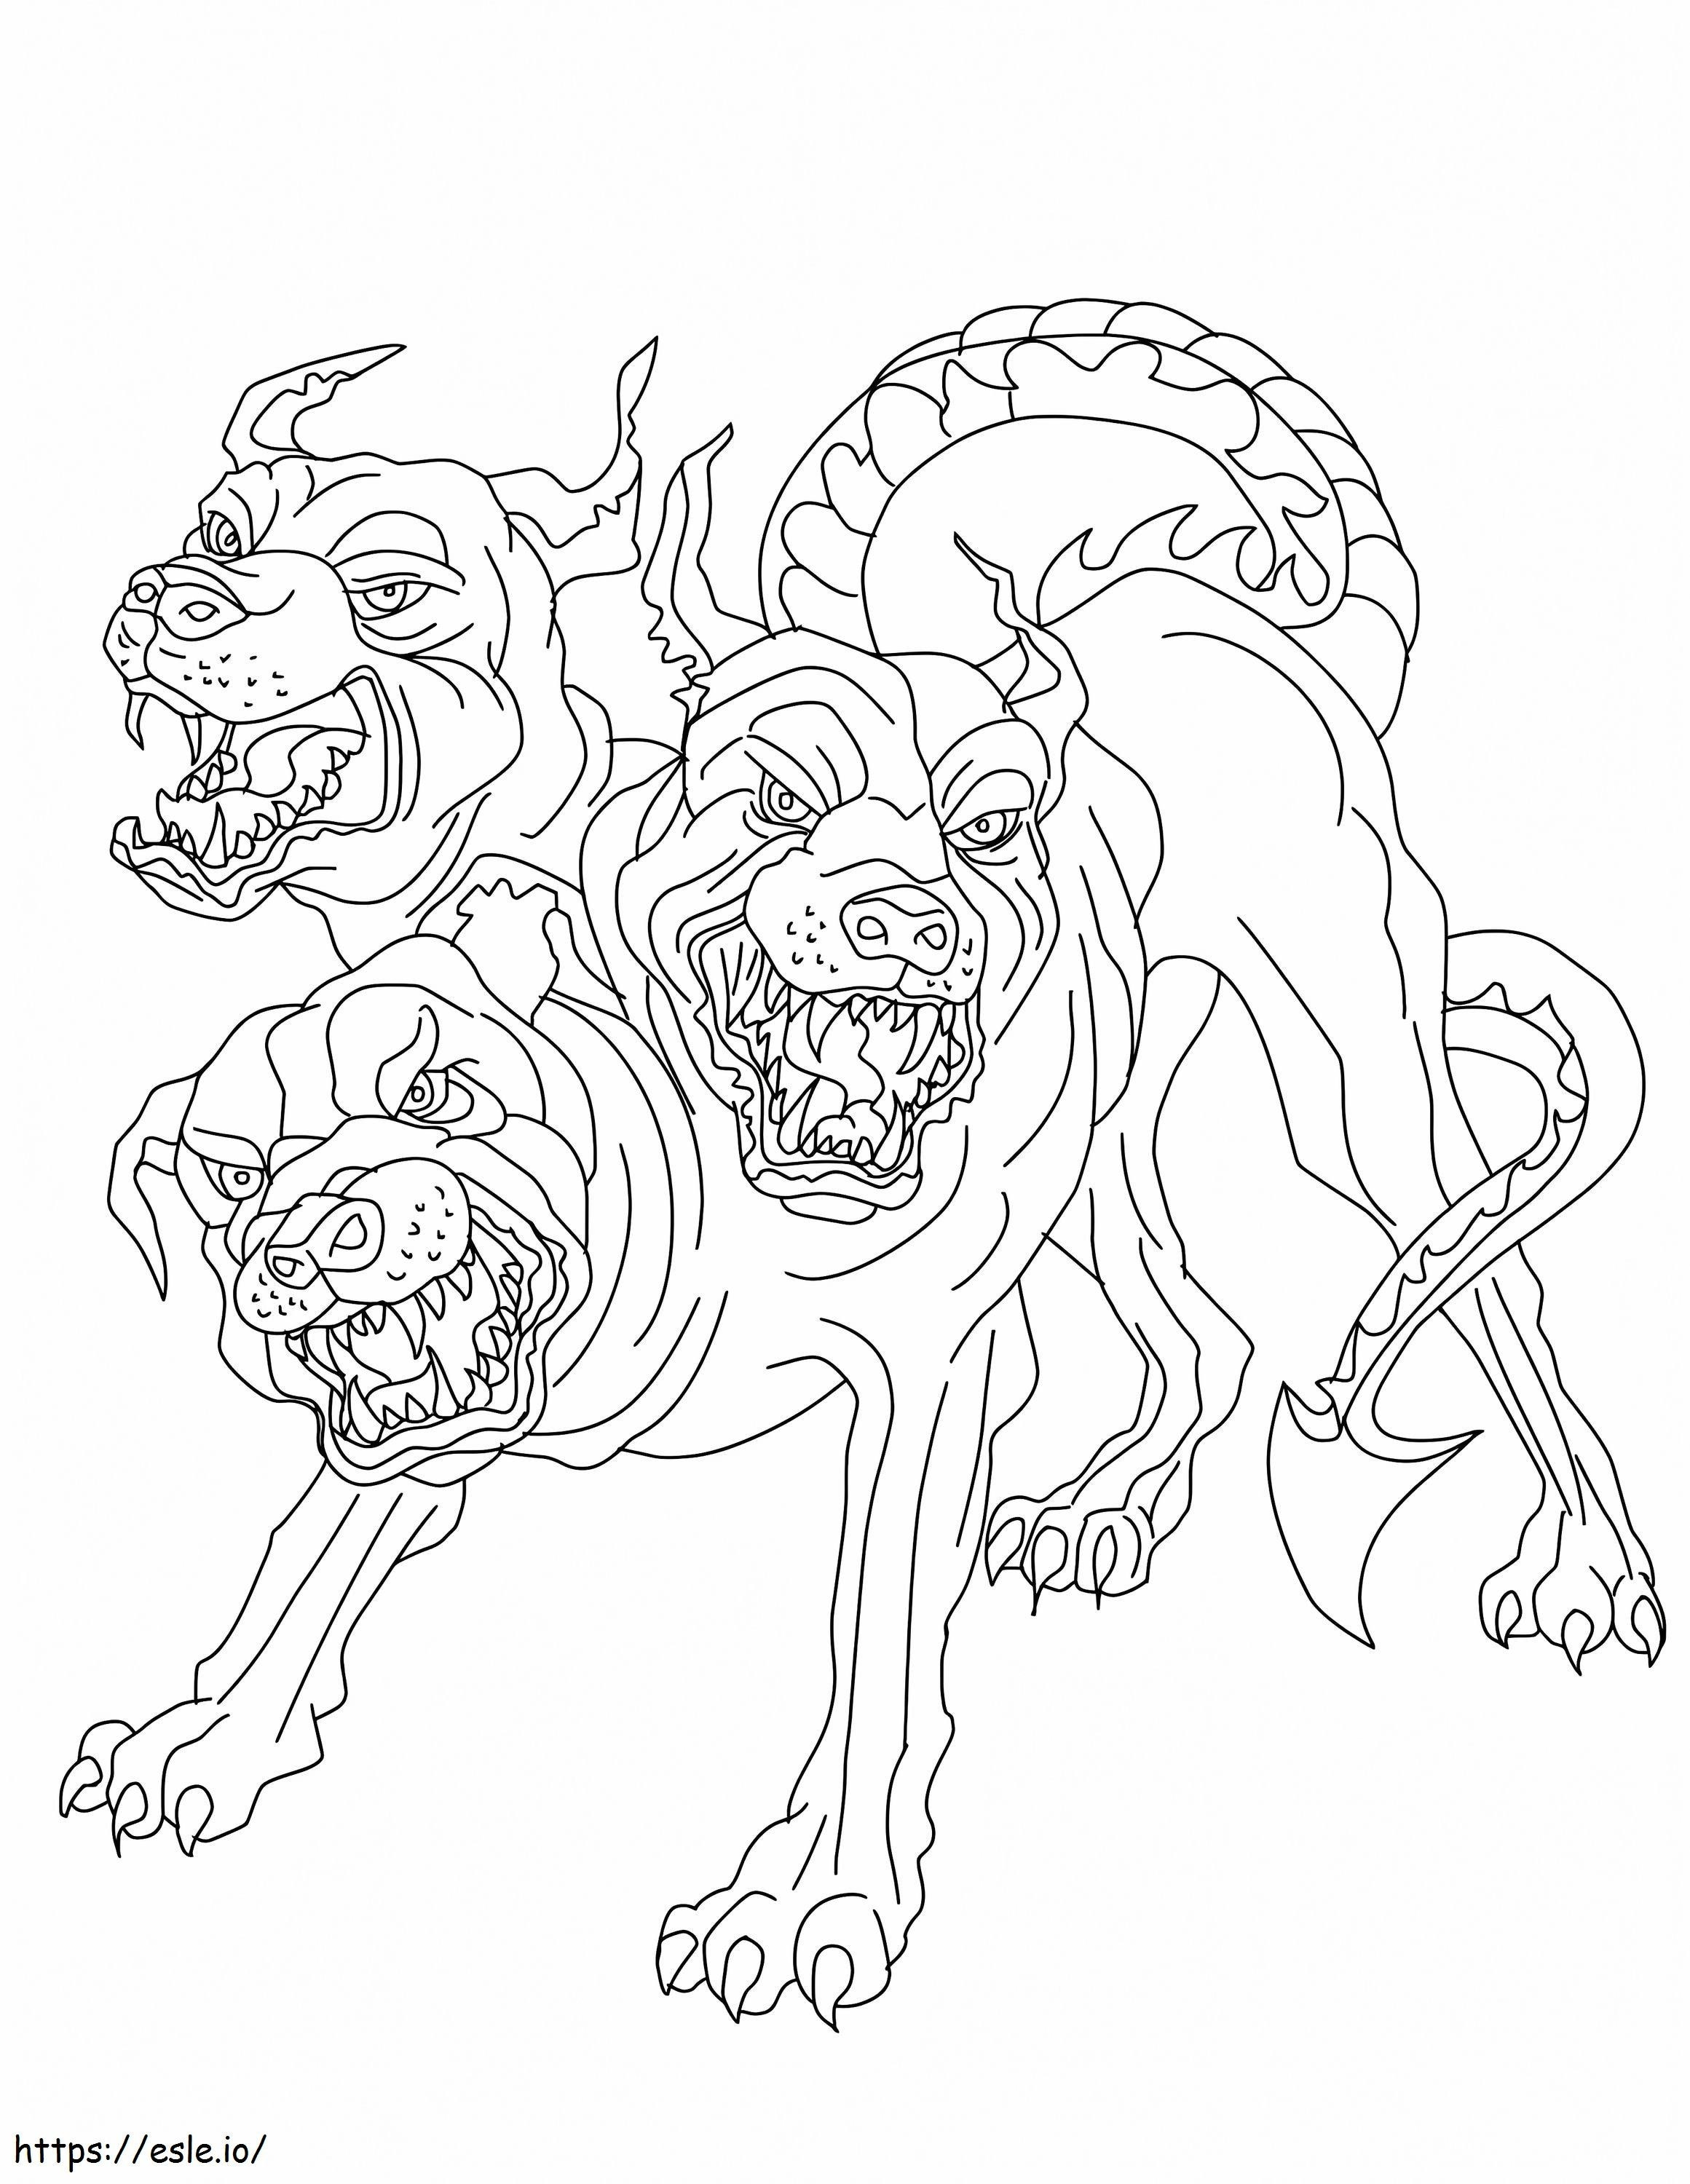 1548756129 03 Cerberus Greek Mythology Wut Source Creature Pages 0 coloring page